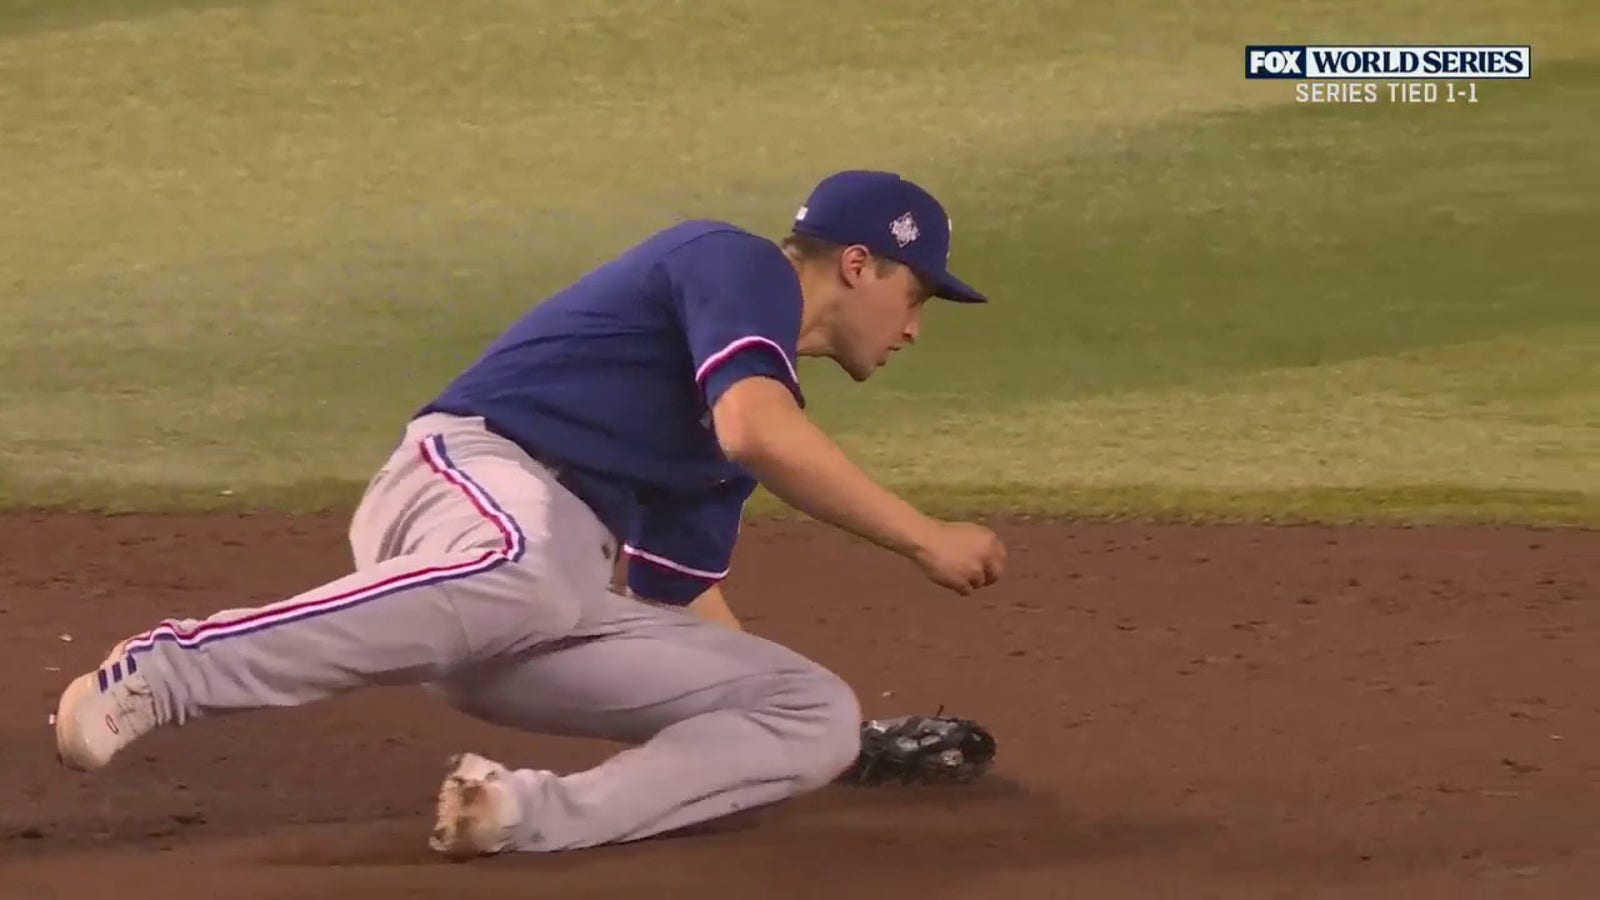 Corey Seager dives for a double play that helps Rangers escape inning against Diamondbacks